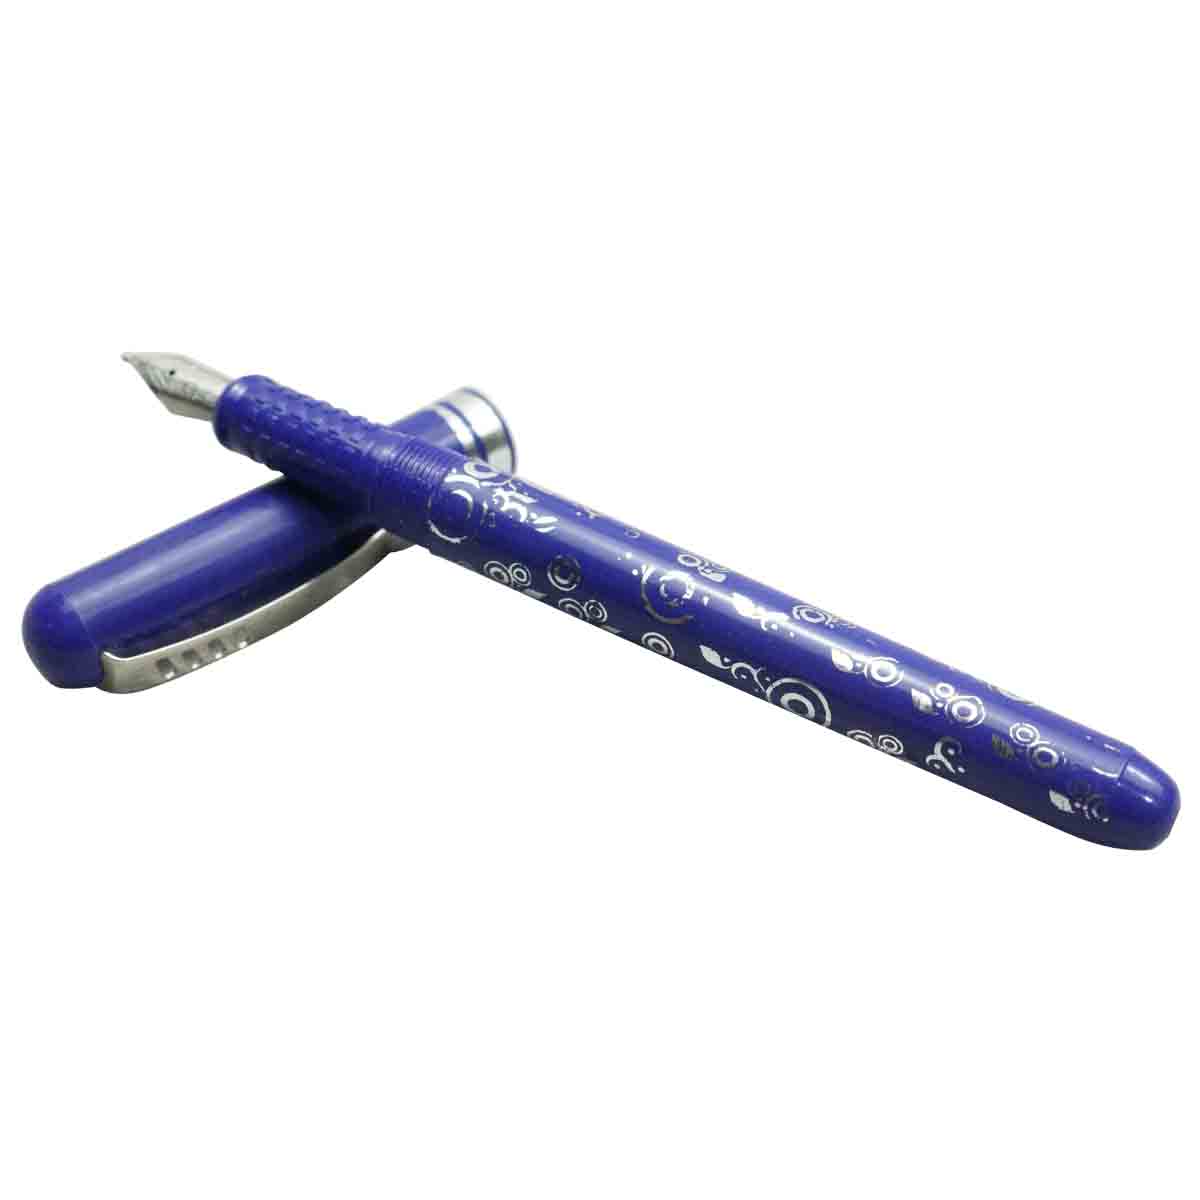 Charter Violet Body and Cap Fountain Pen Model - 91123